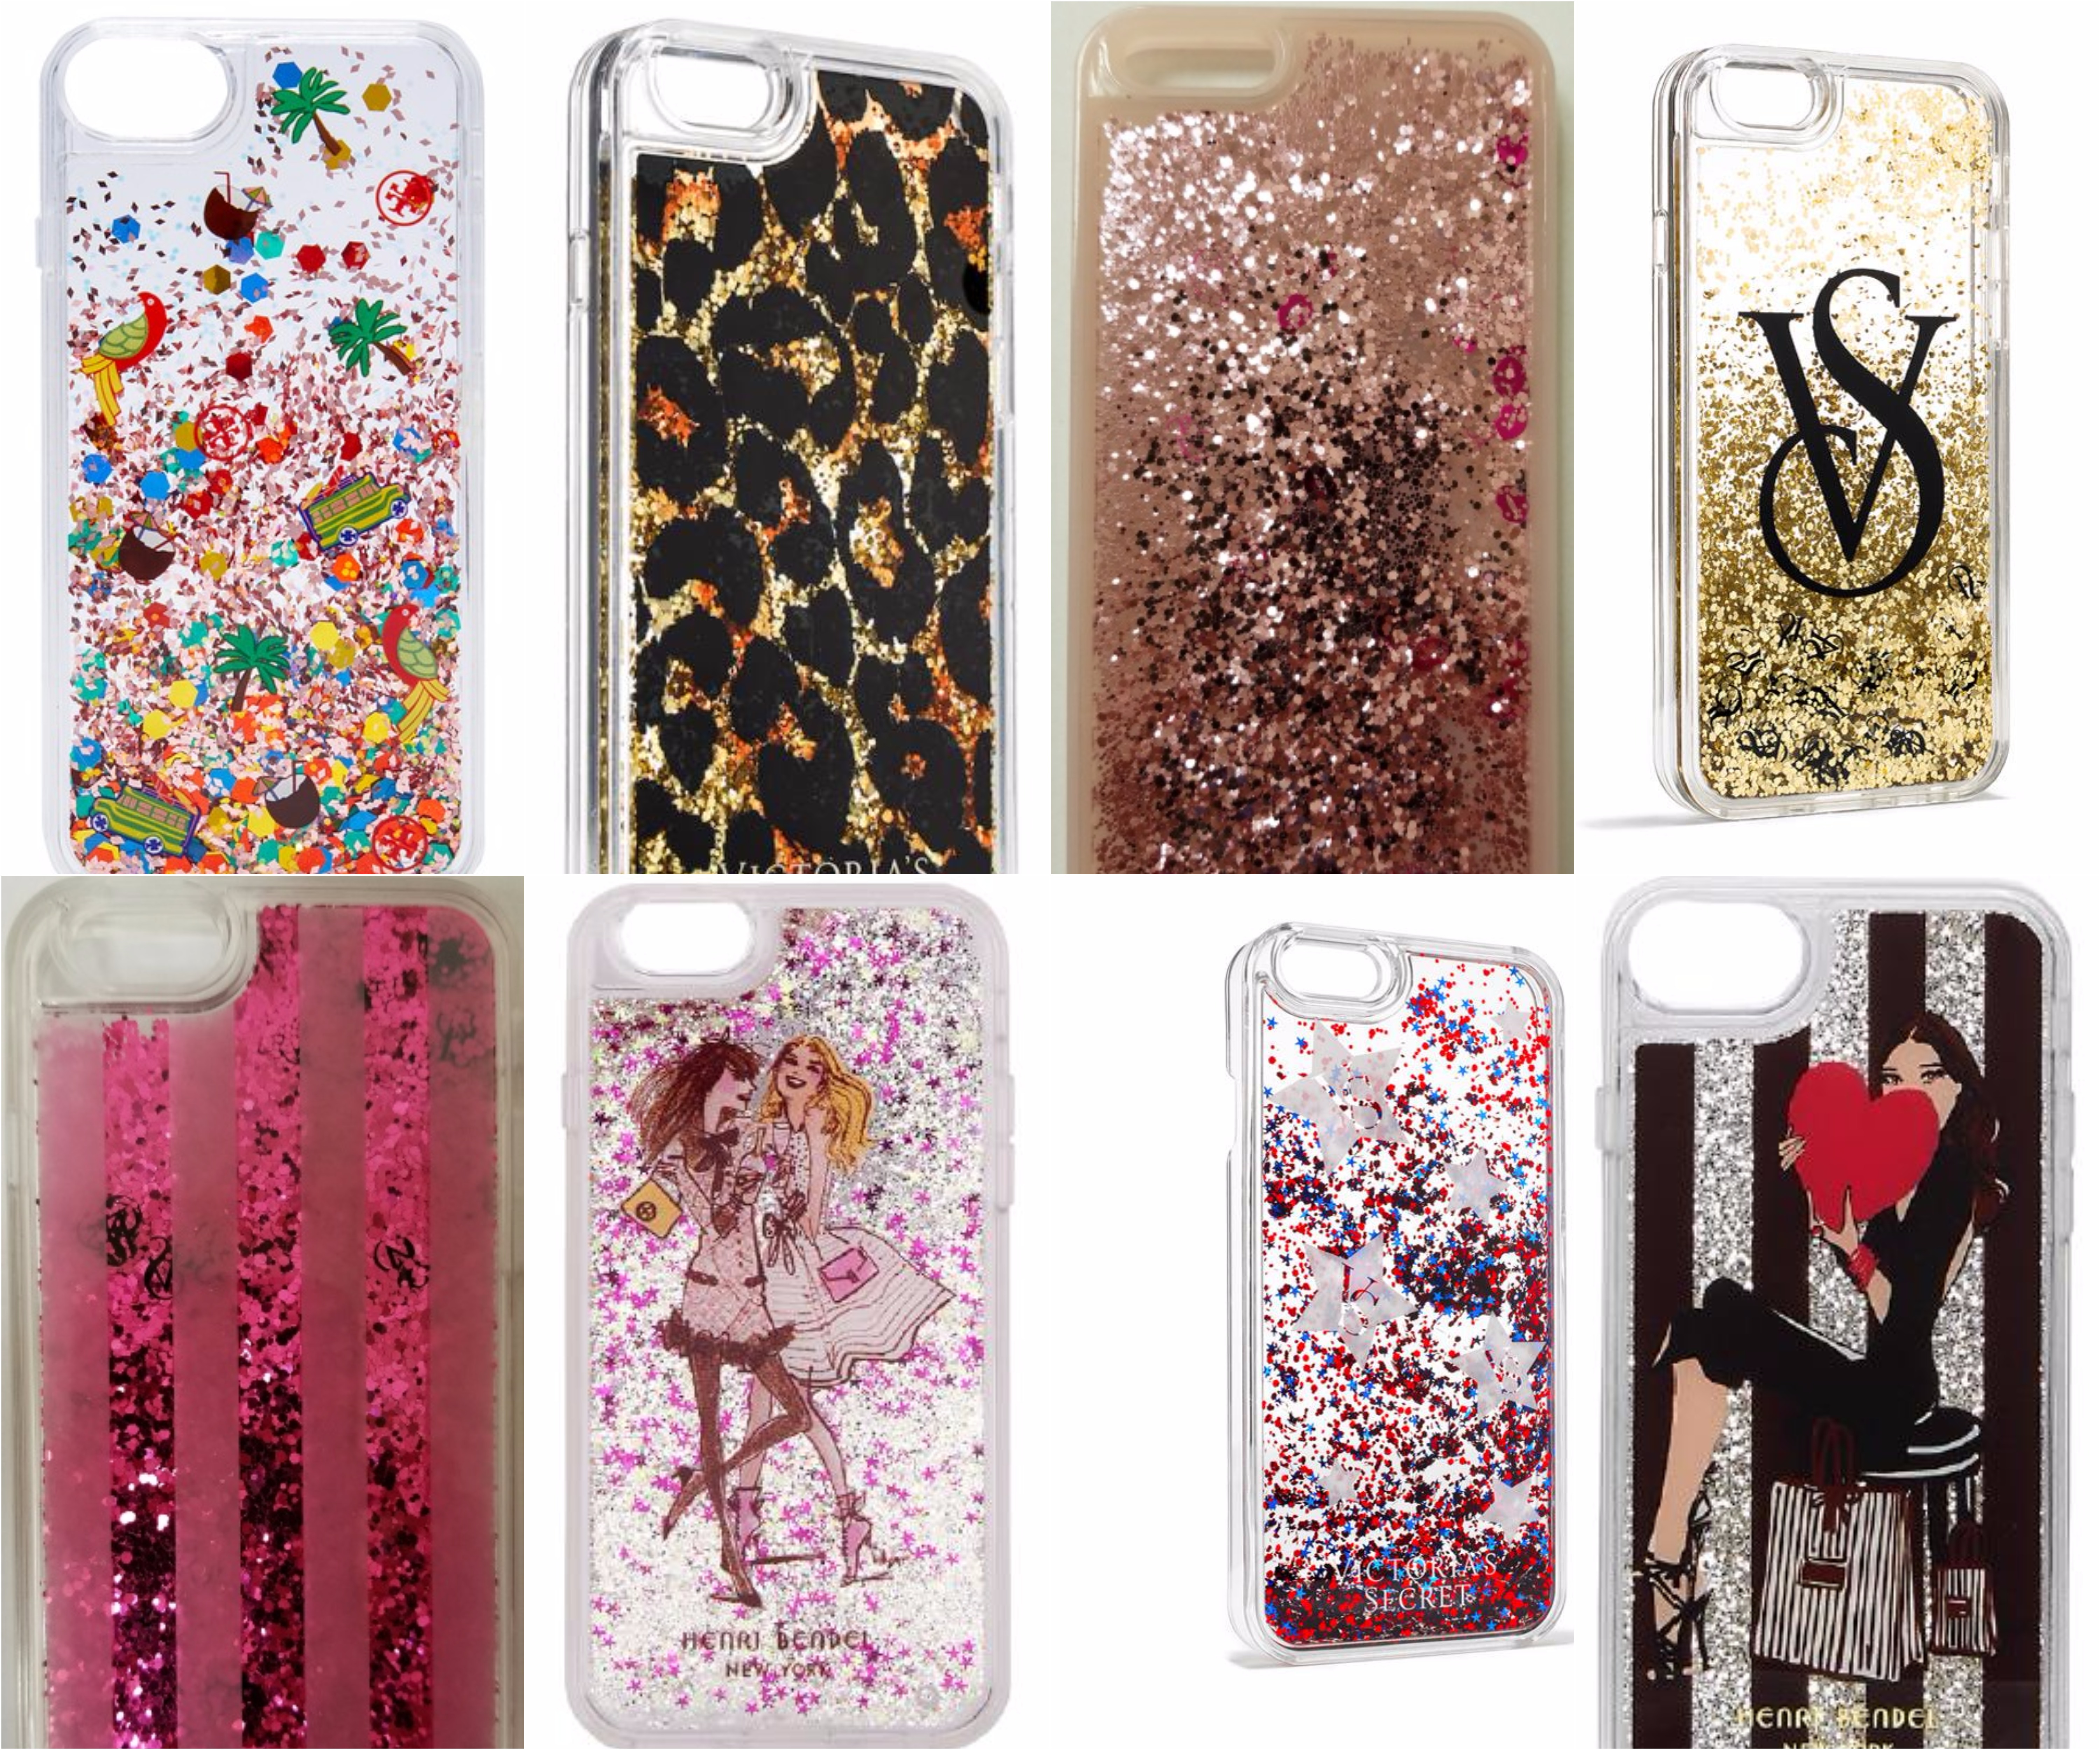 Hundreds Of Thousands Of Glittery Phone Cases Sold At Major Retailers Recalled After Burning People